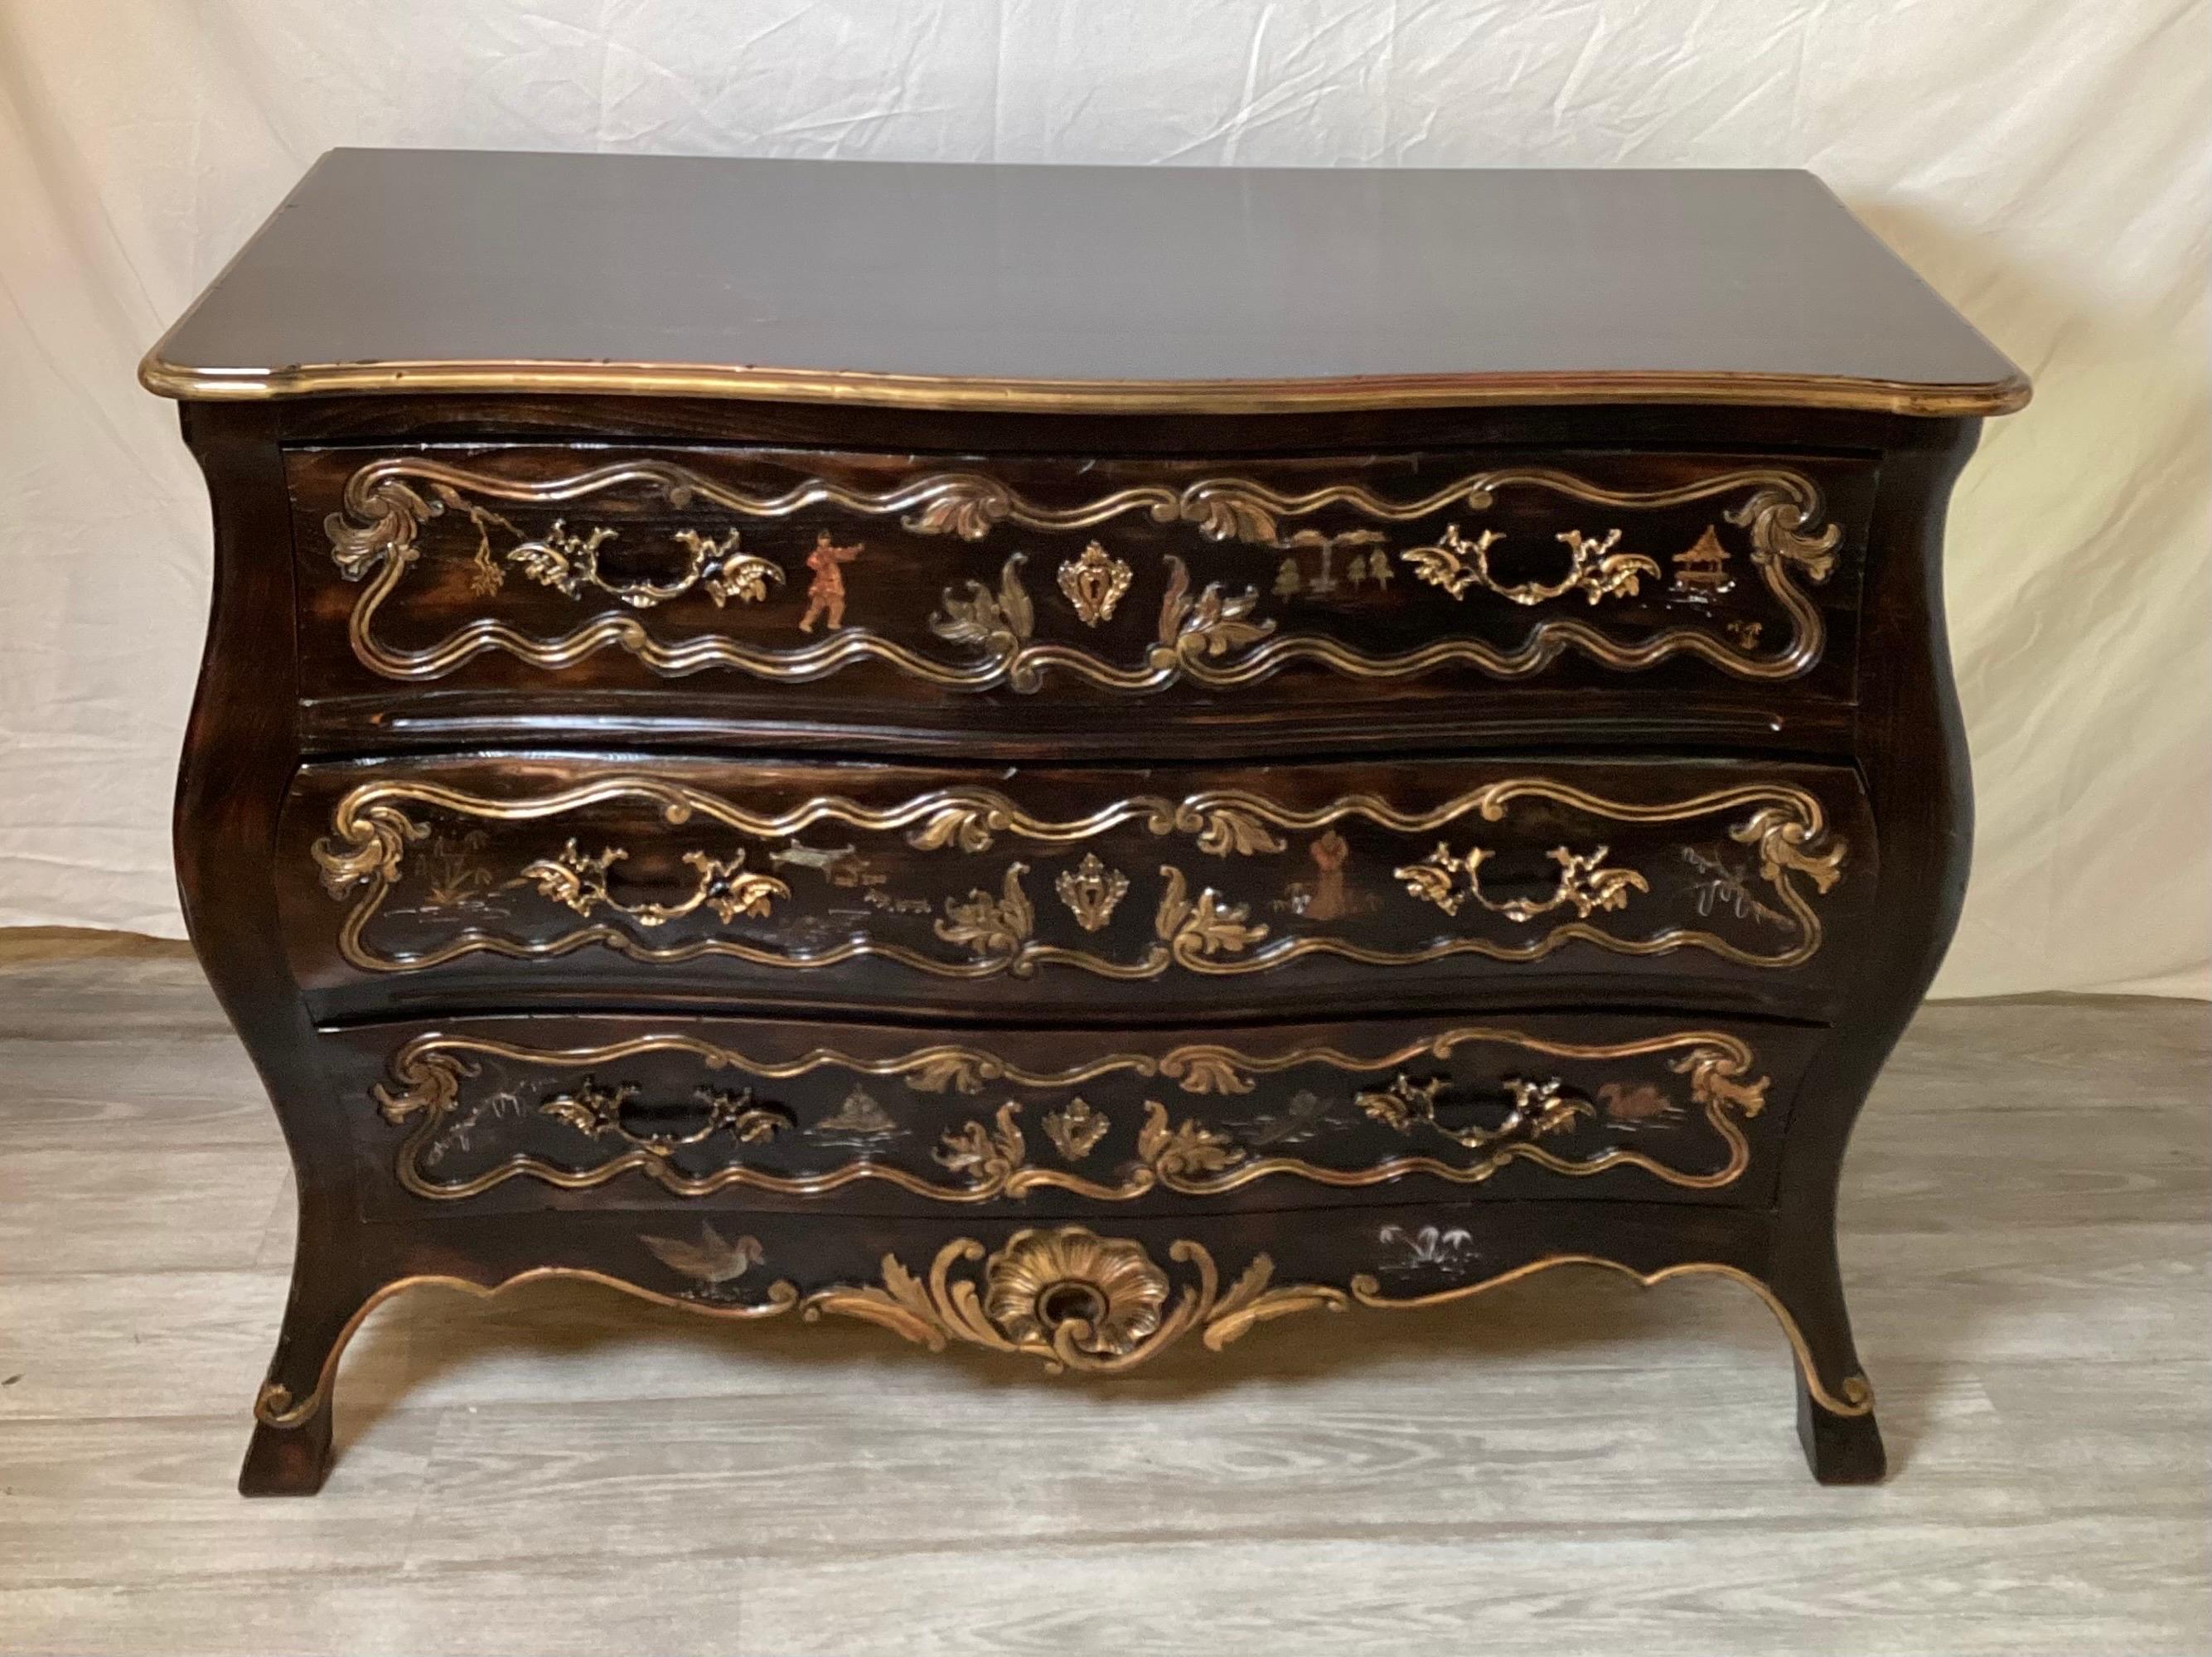 A mid 20th Century carved, hand painted and ebonized continental chinoiserie chest. The three drawers with Asian style decoration with gilt highlights. The French form with curved bombe body and flared feet.